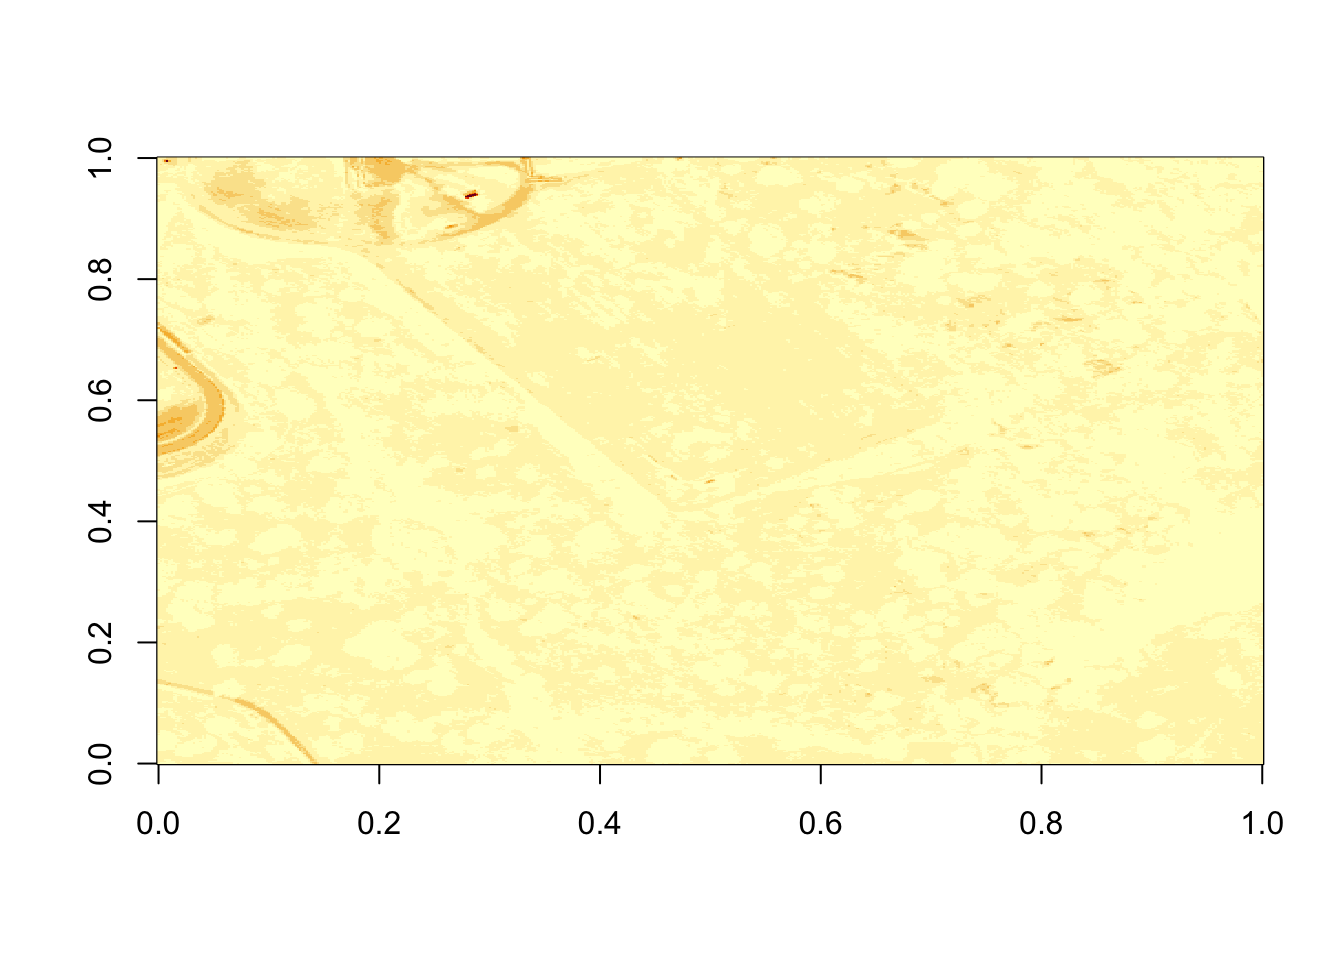 Plot of reflectance values for band 9 data with values equal to -9999 set to NA. Image data in raster format will often contain no data values, which may be attributed to the sensor not collecting data in that area of the image or to processing results which yield null values. Reflectance datasets designate -9999 as data ignore values. As such, we will reassign -9999 values to NA so R won't try to render these pixels.